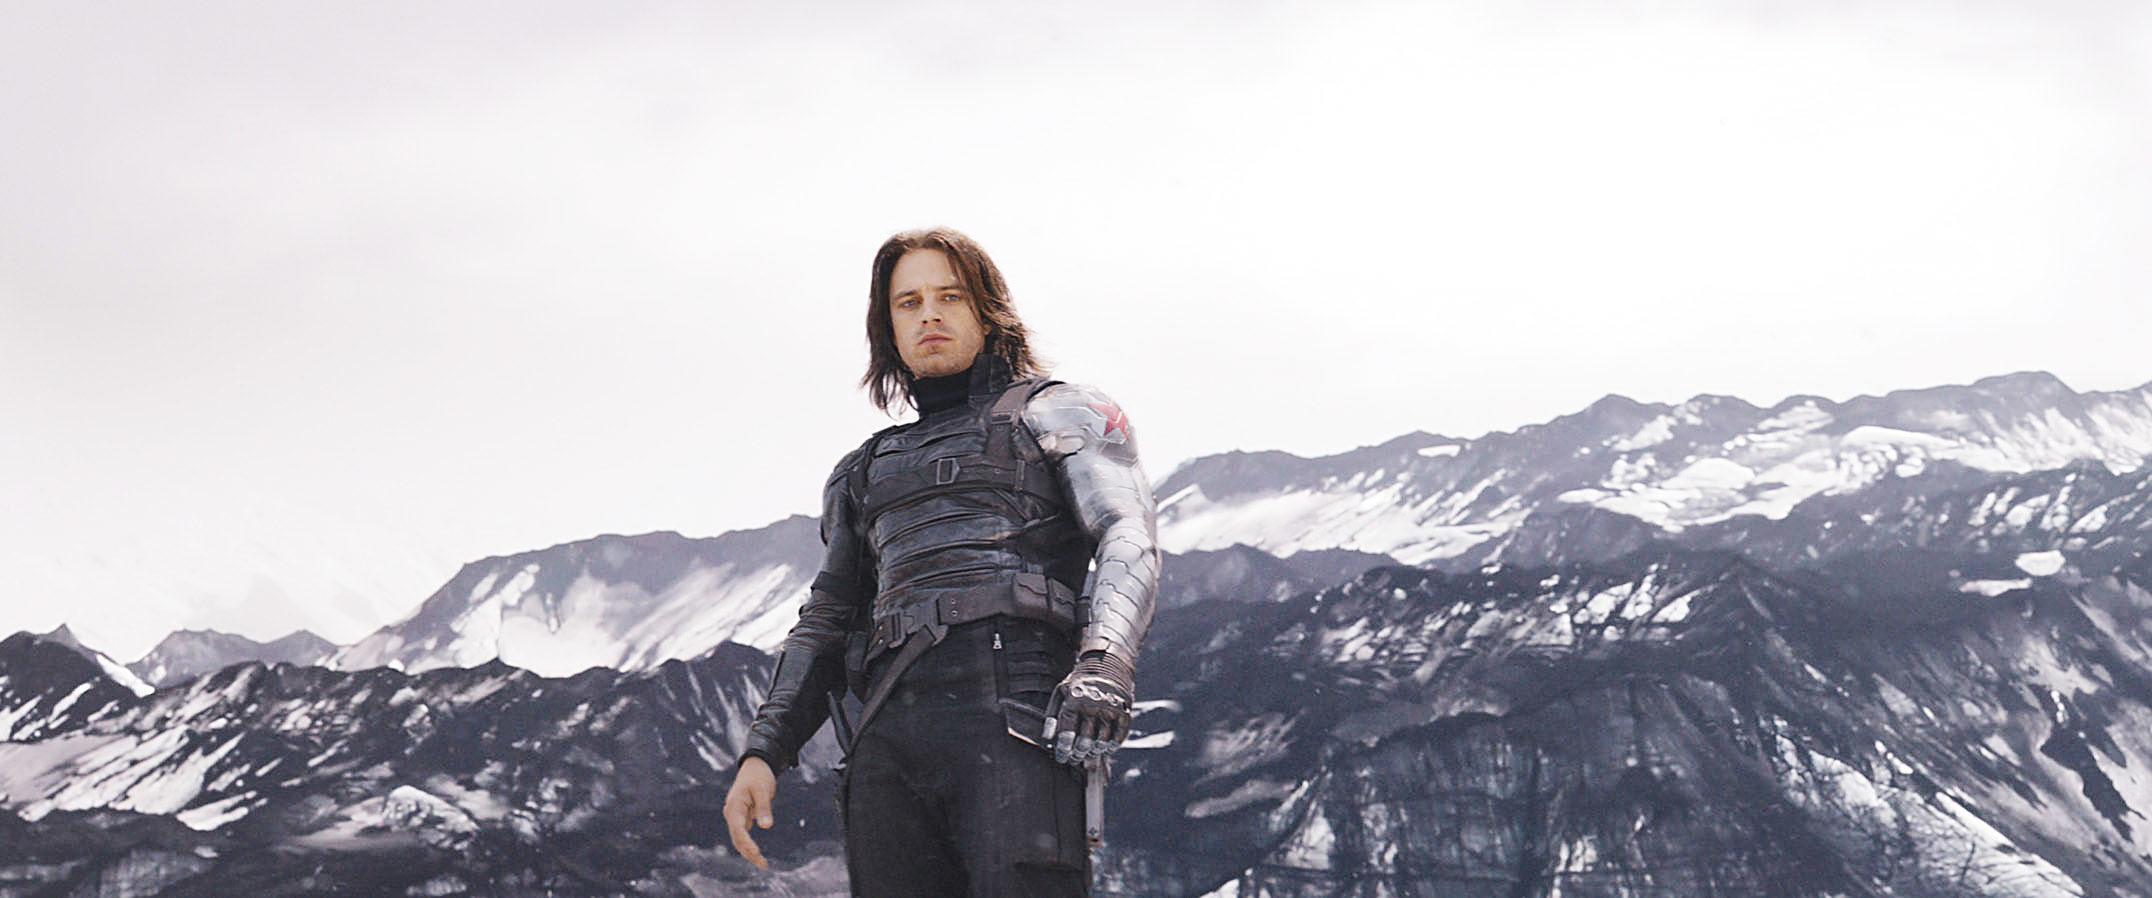 Bucky wearing his Winter Soldier outfit